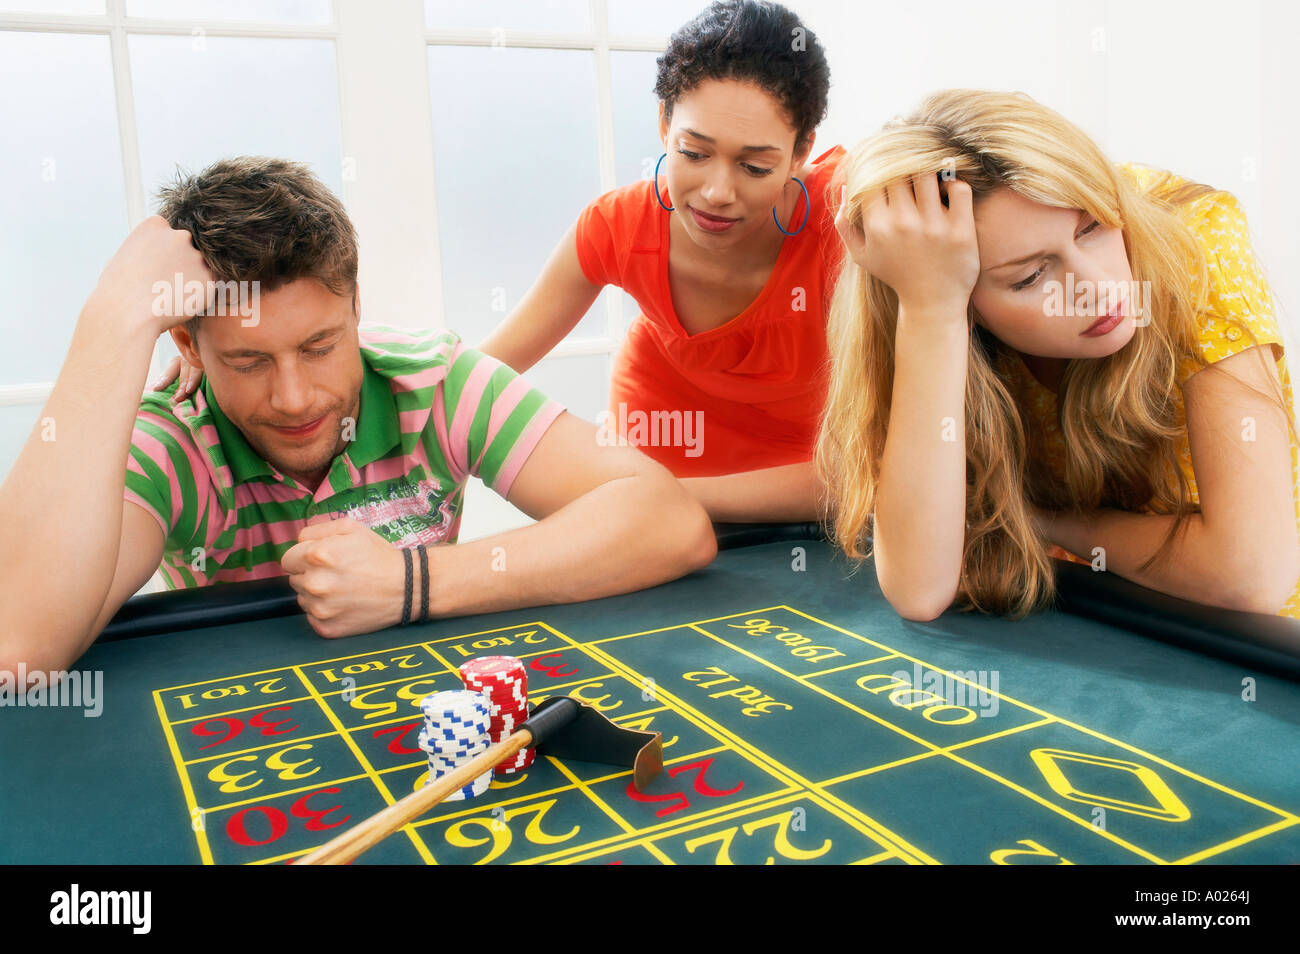 Young man at roulette table losing large bet Stock Photo